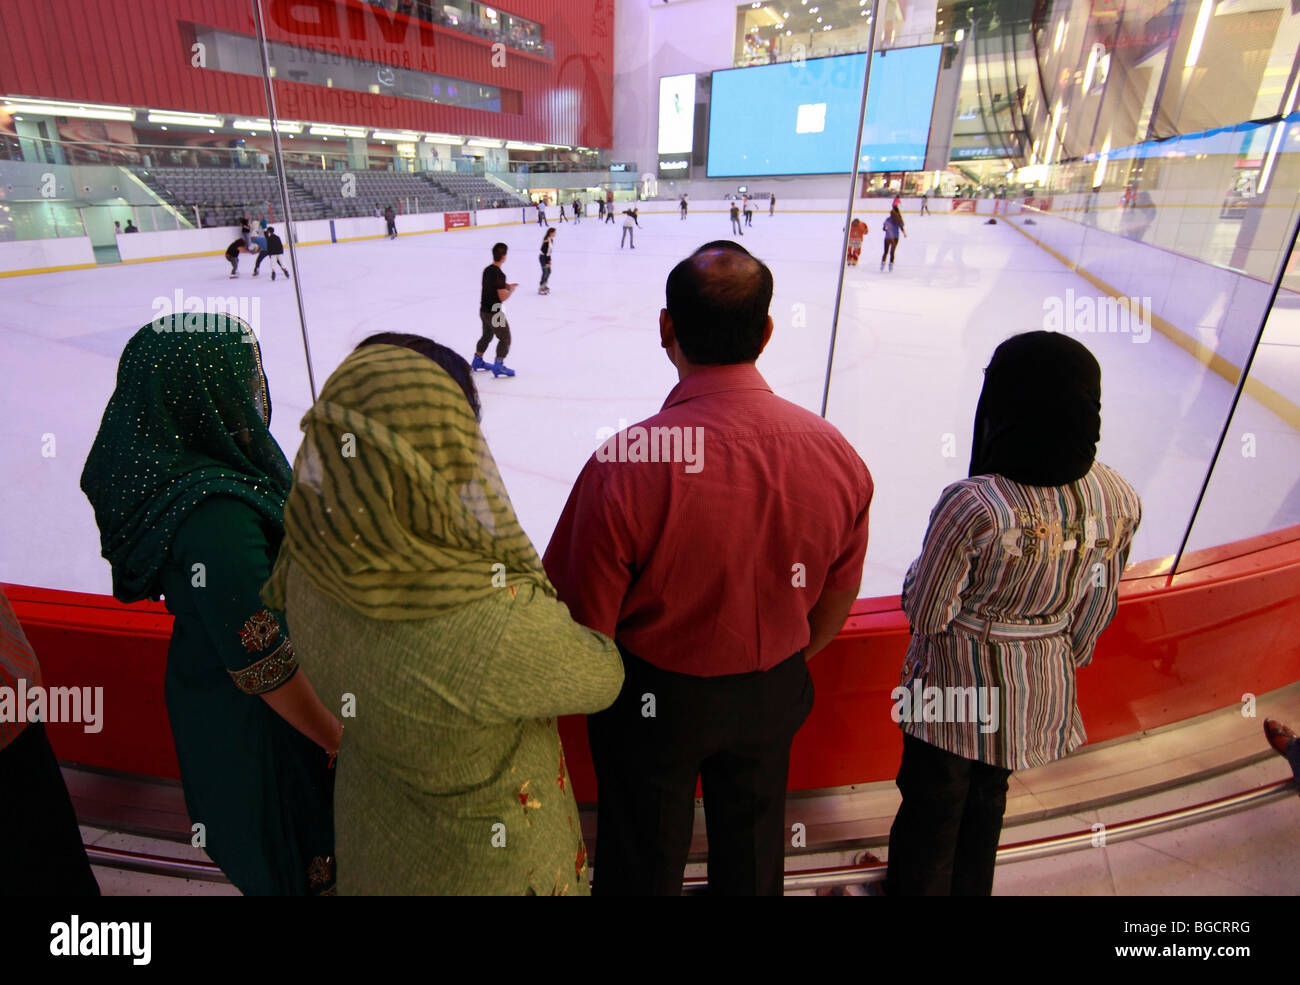 People on the ice rink in the Mall of Dubai, United Arab Emirates Stock Photo